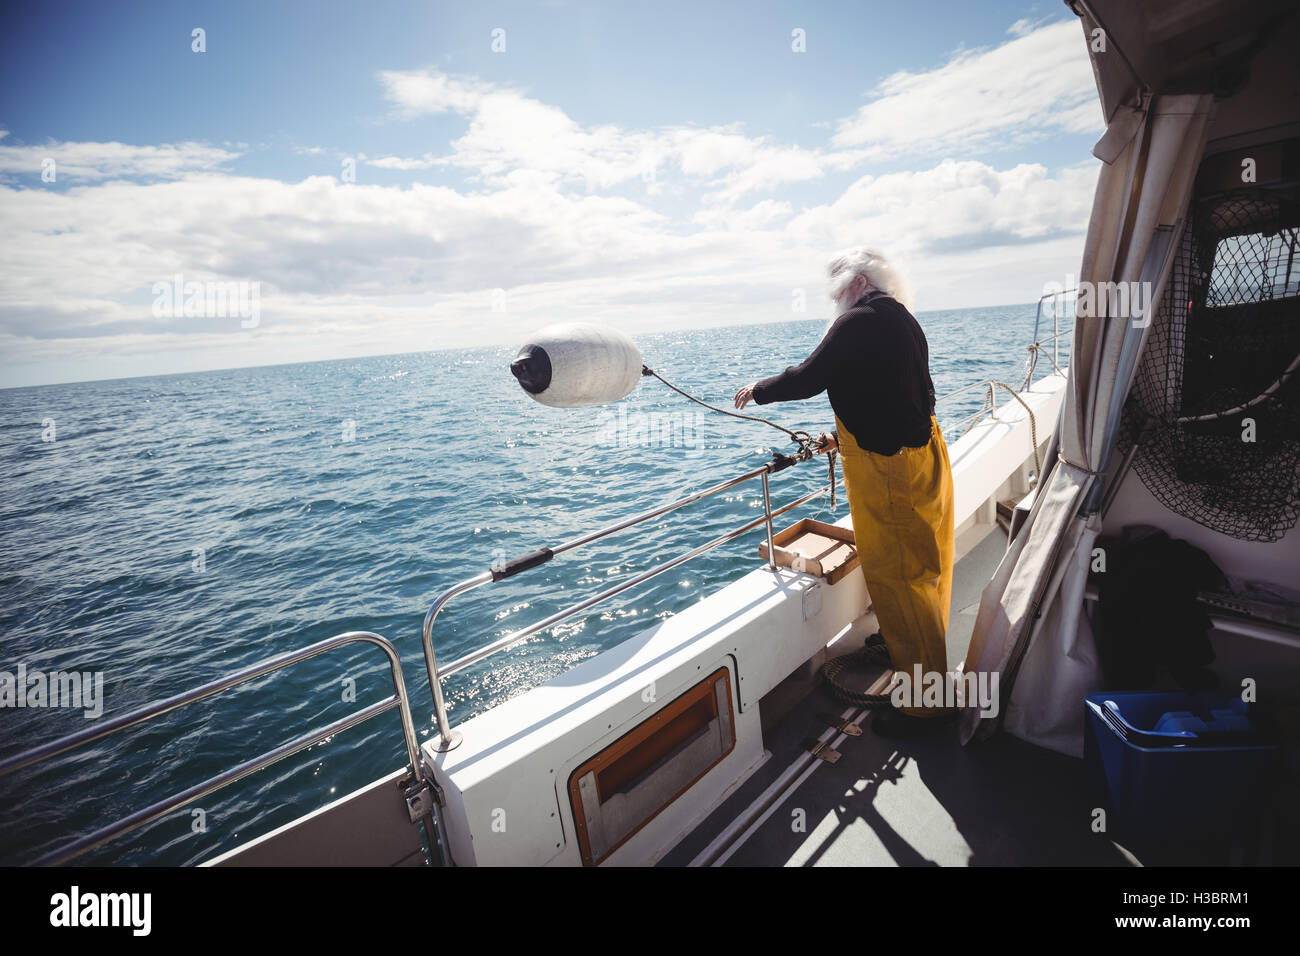 Fisherman throwing a buoy into the sea Stock Photo